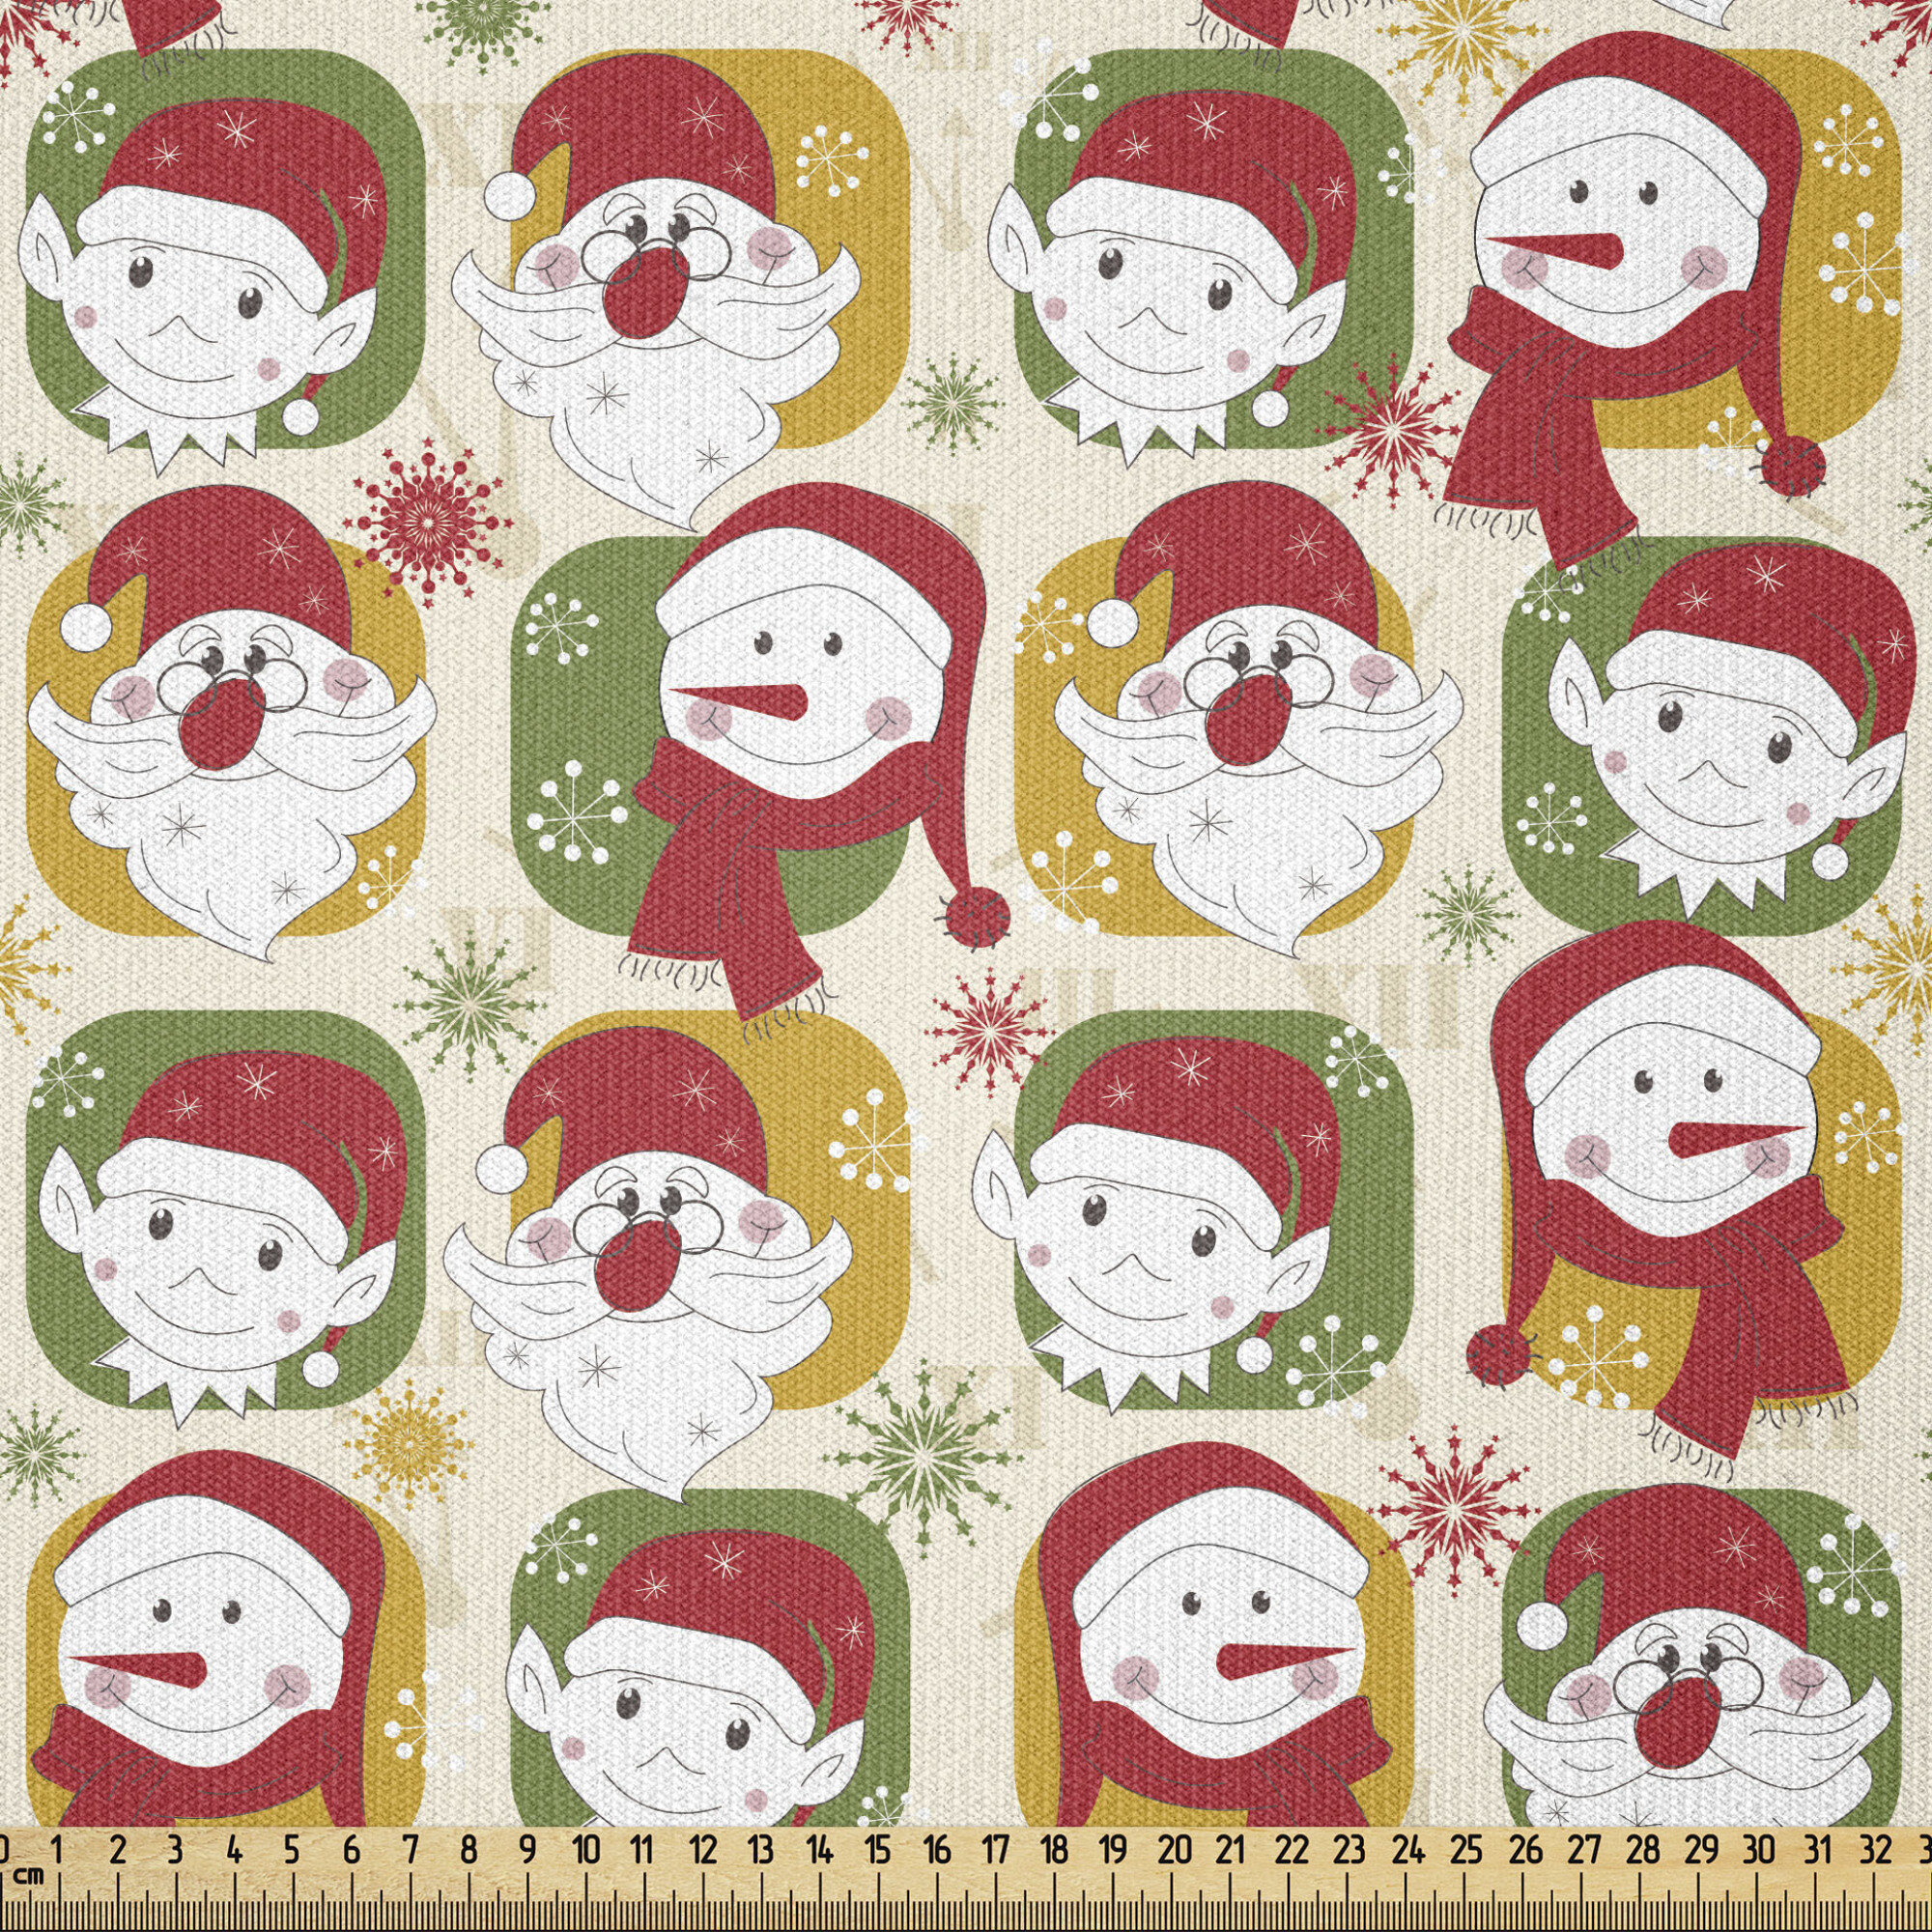 Merry Christmas Fabric by the Yard, Red Santa Claus Christmas Material,  Decorative Home Decor Furnishing Upholstery Fabric, Cute Xmas Fabric 